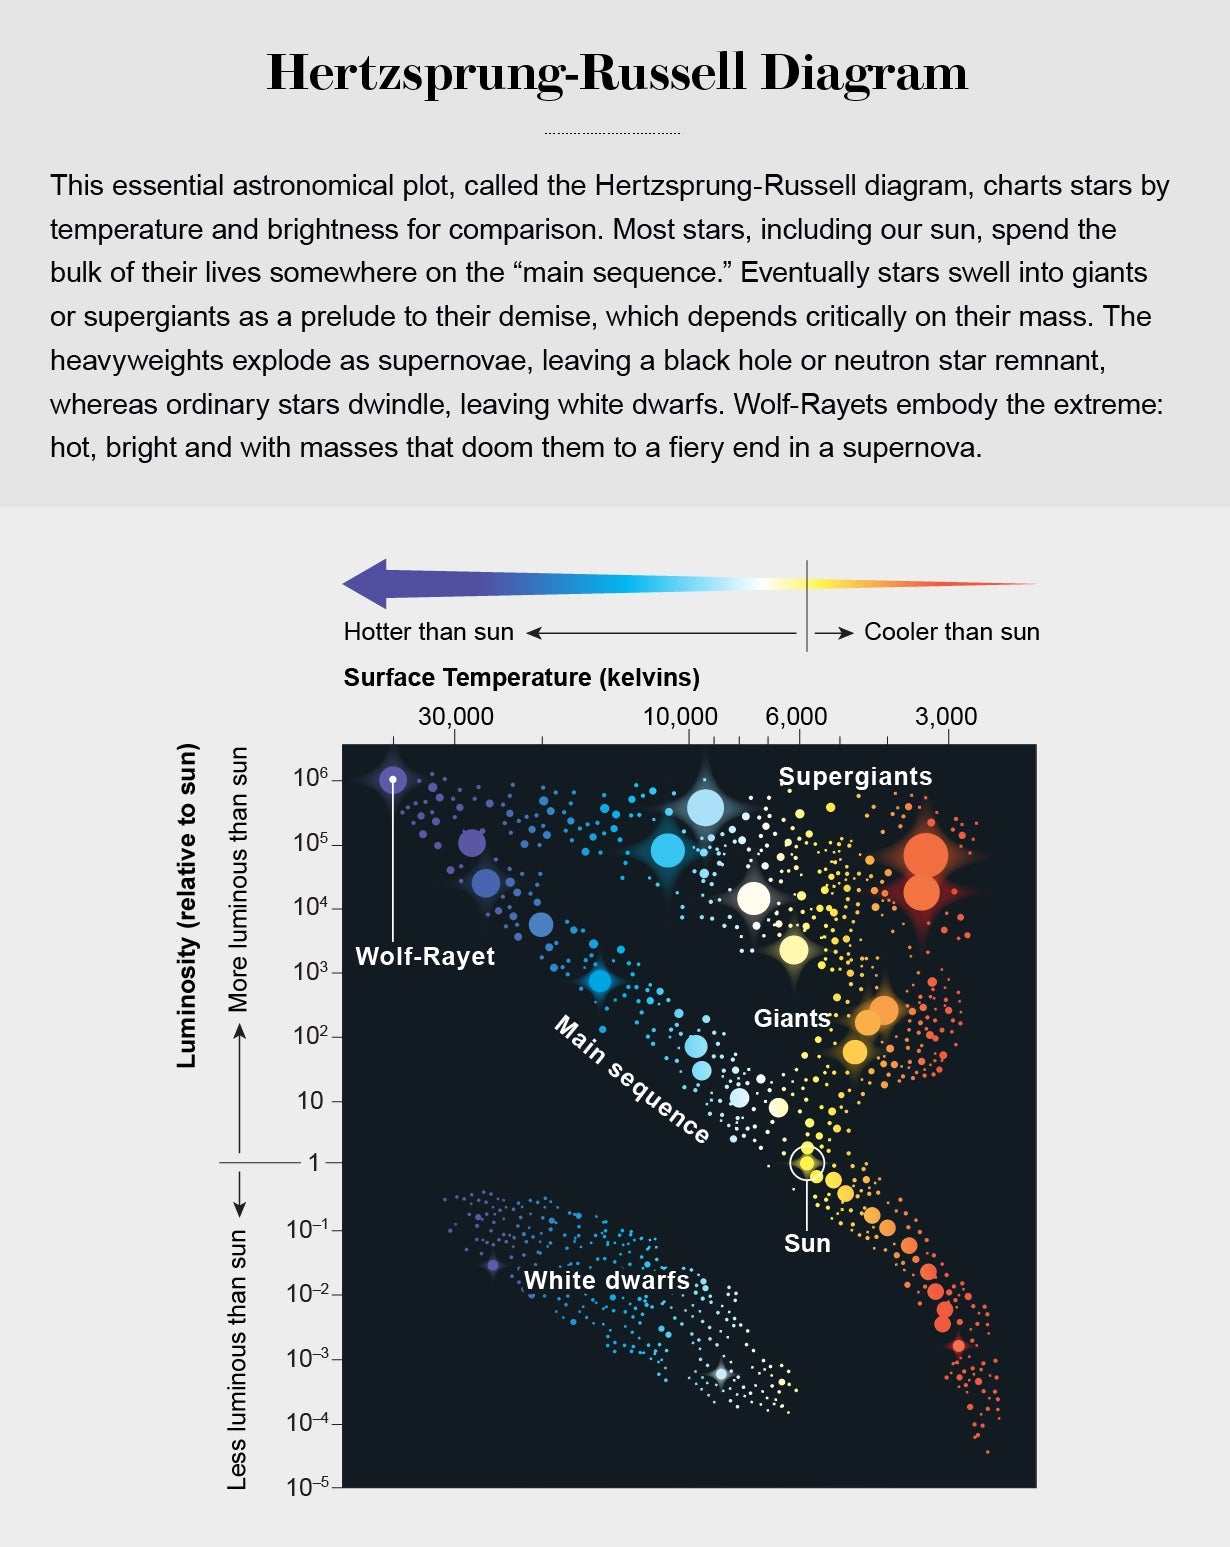 Hertzsprung-Russell diagram shows stars as circles scaled according to mass and positioned along two axes indicating temperature and brightness, with Wolf-Rayets pictured as relatively large circles occupying the hottest, brightest corner.